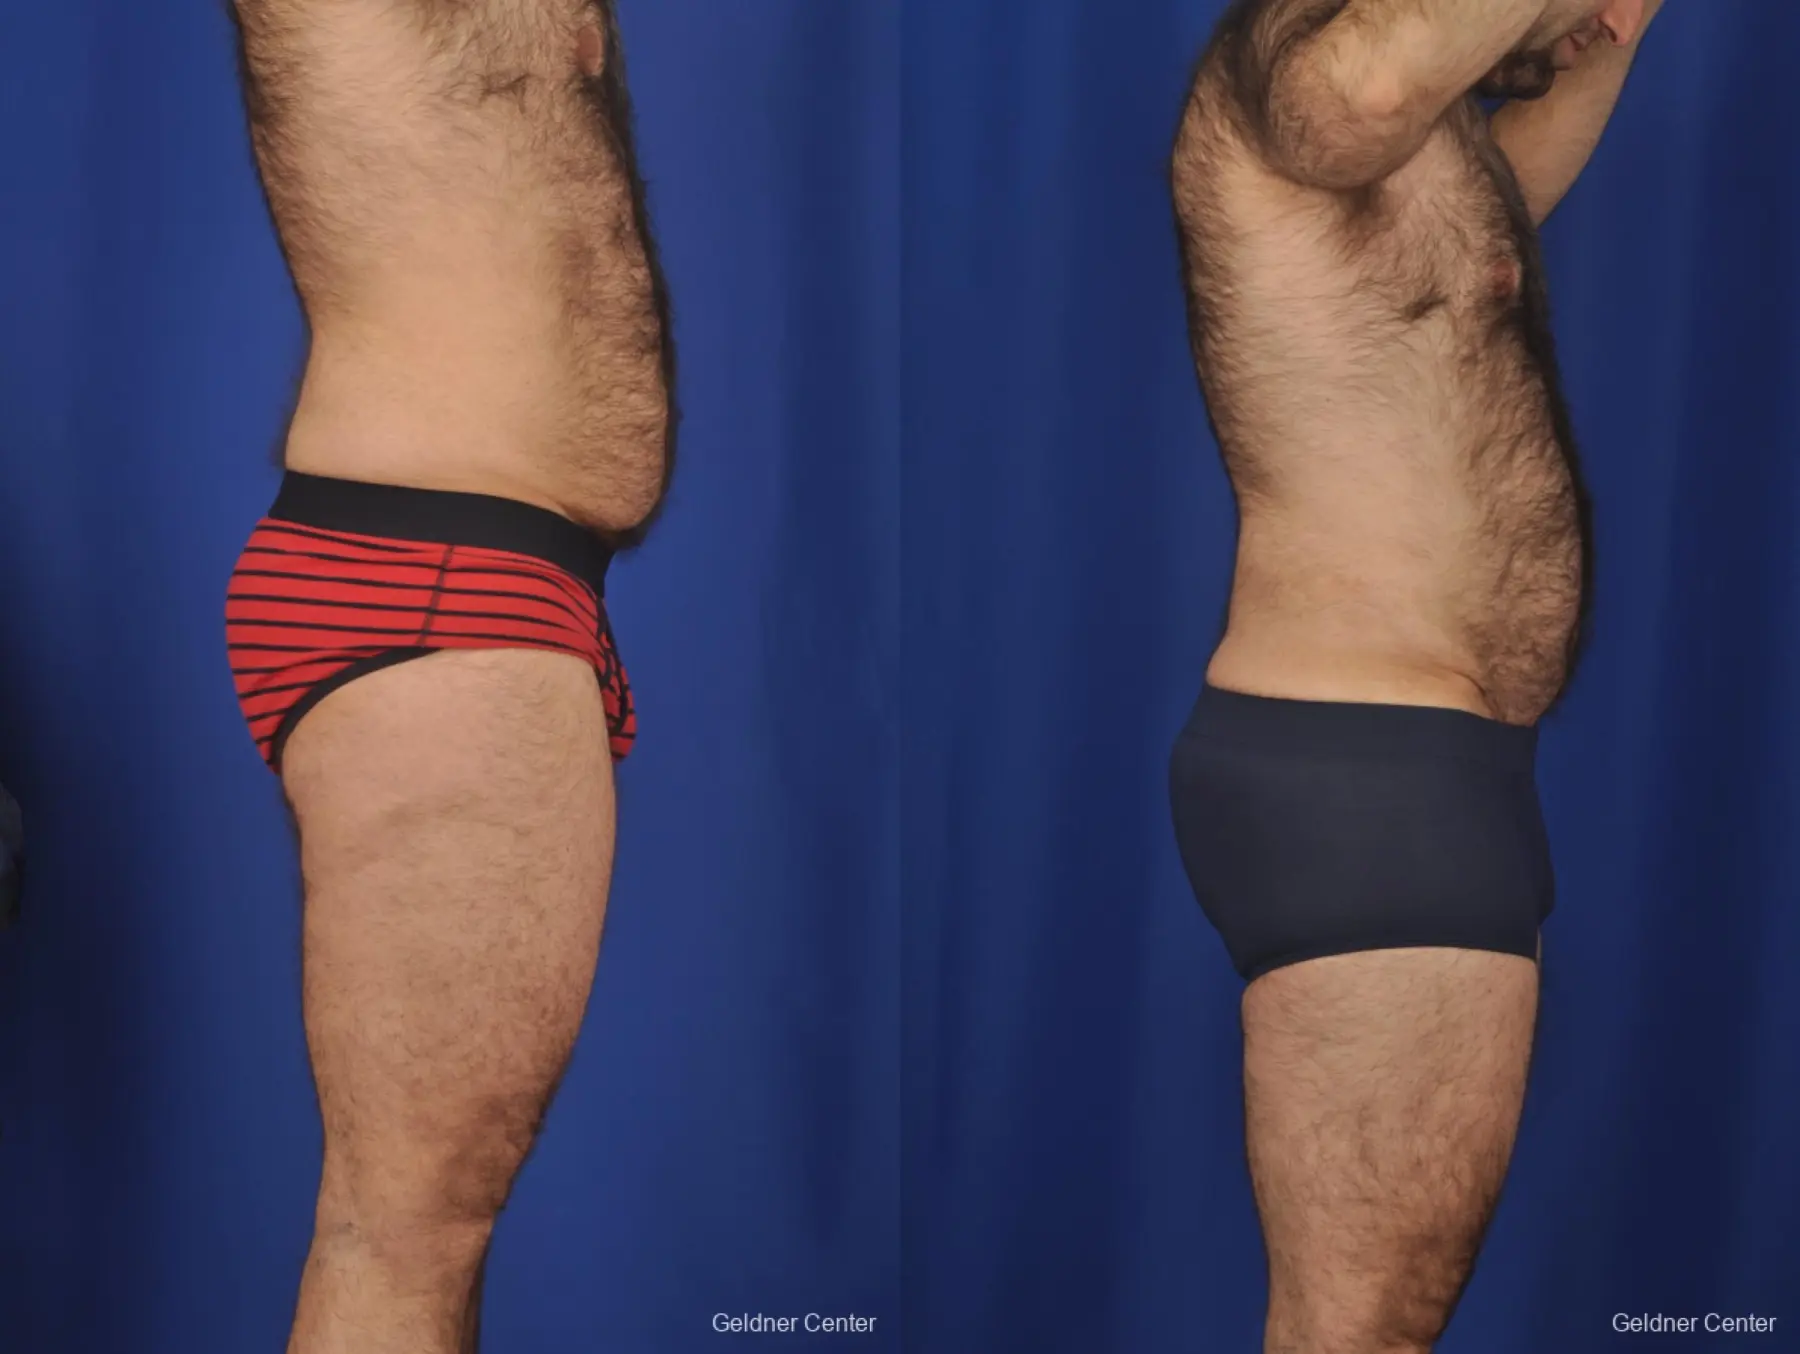 Abdominoplasty For Men: Patient 1 - Before and After 3